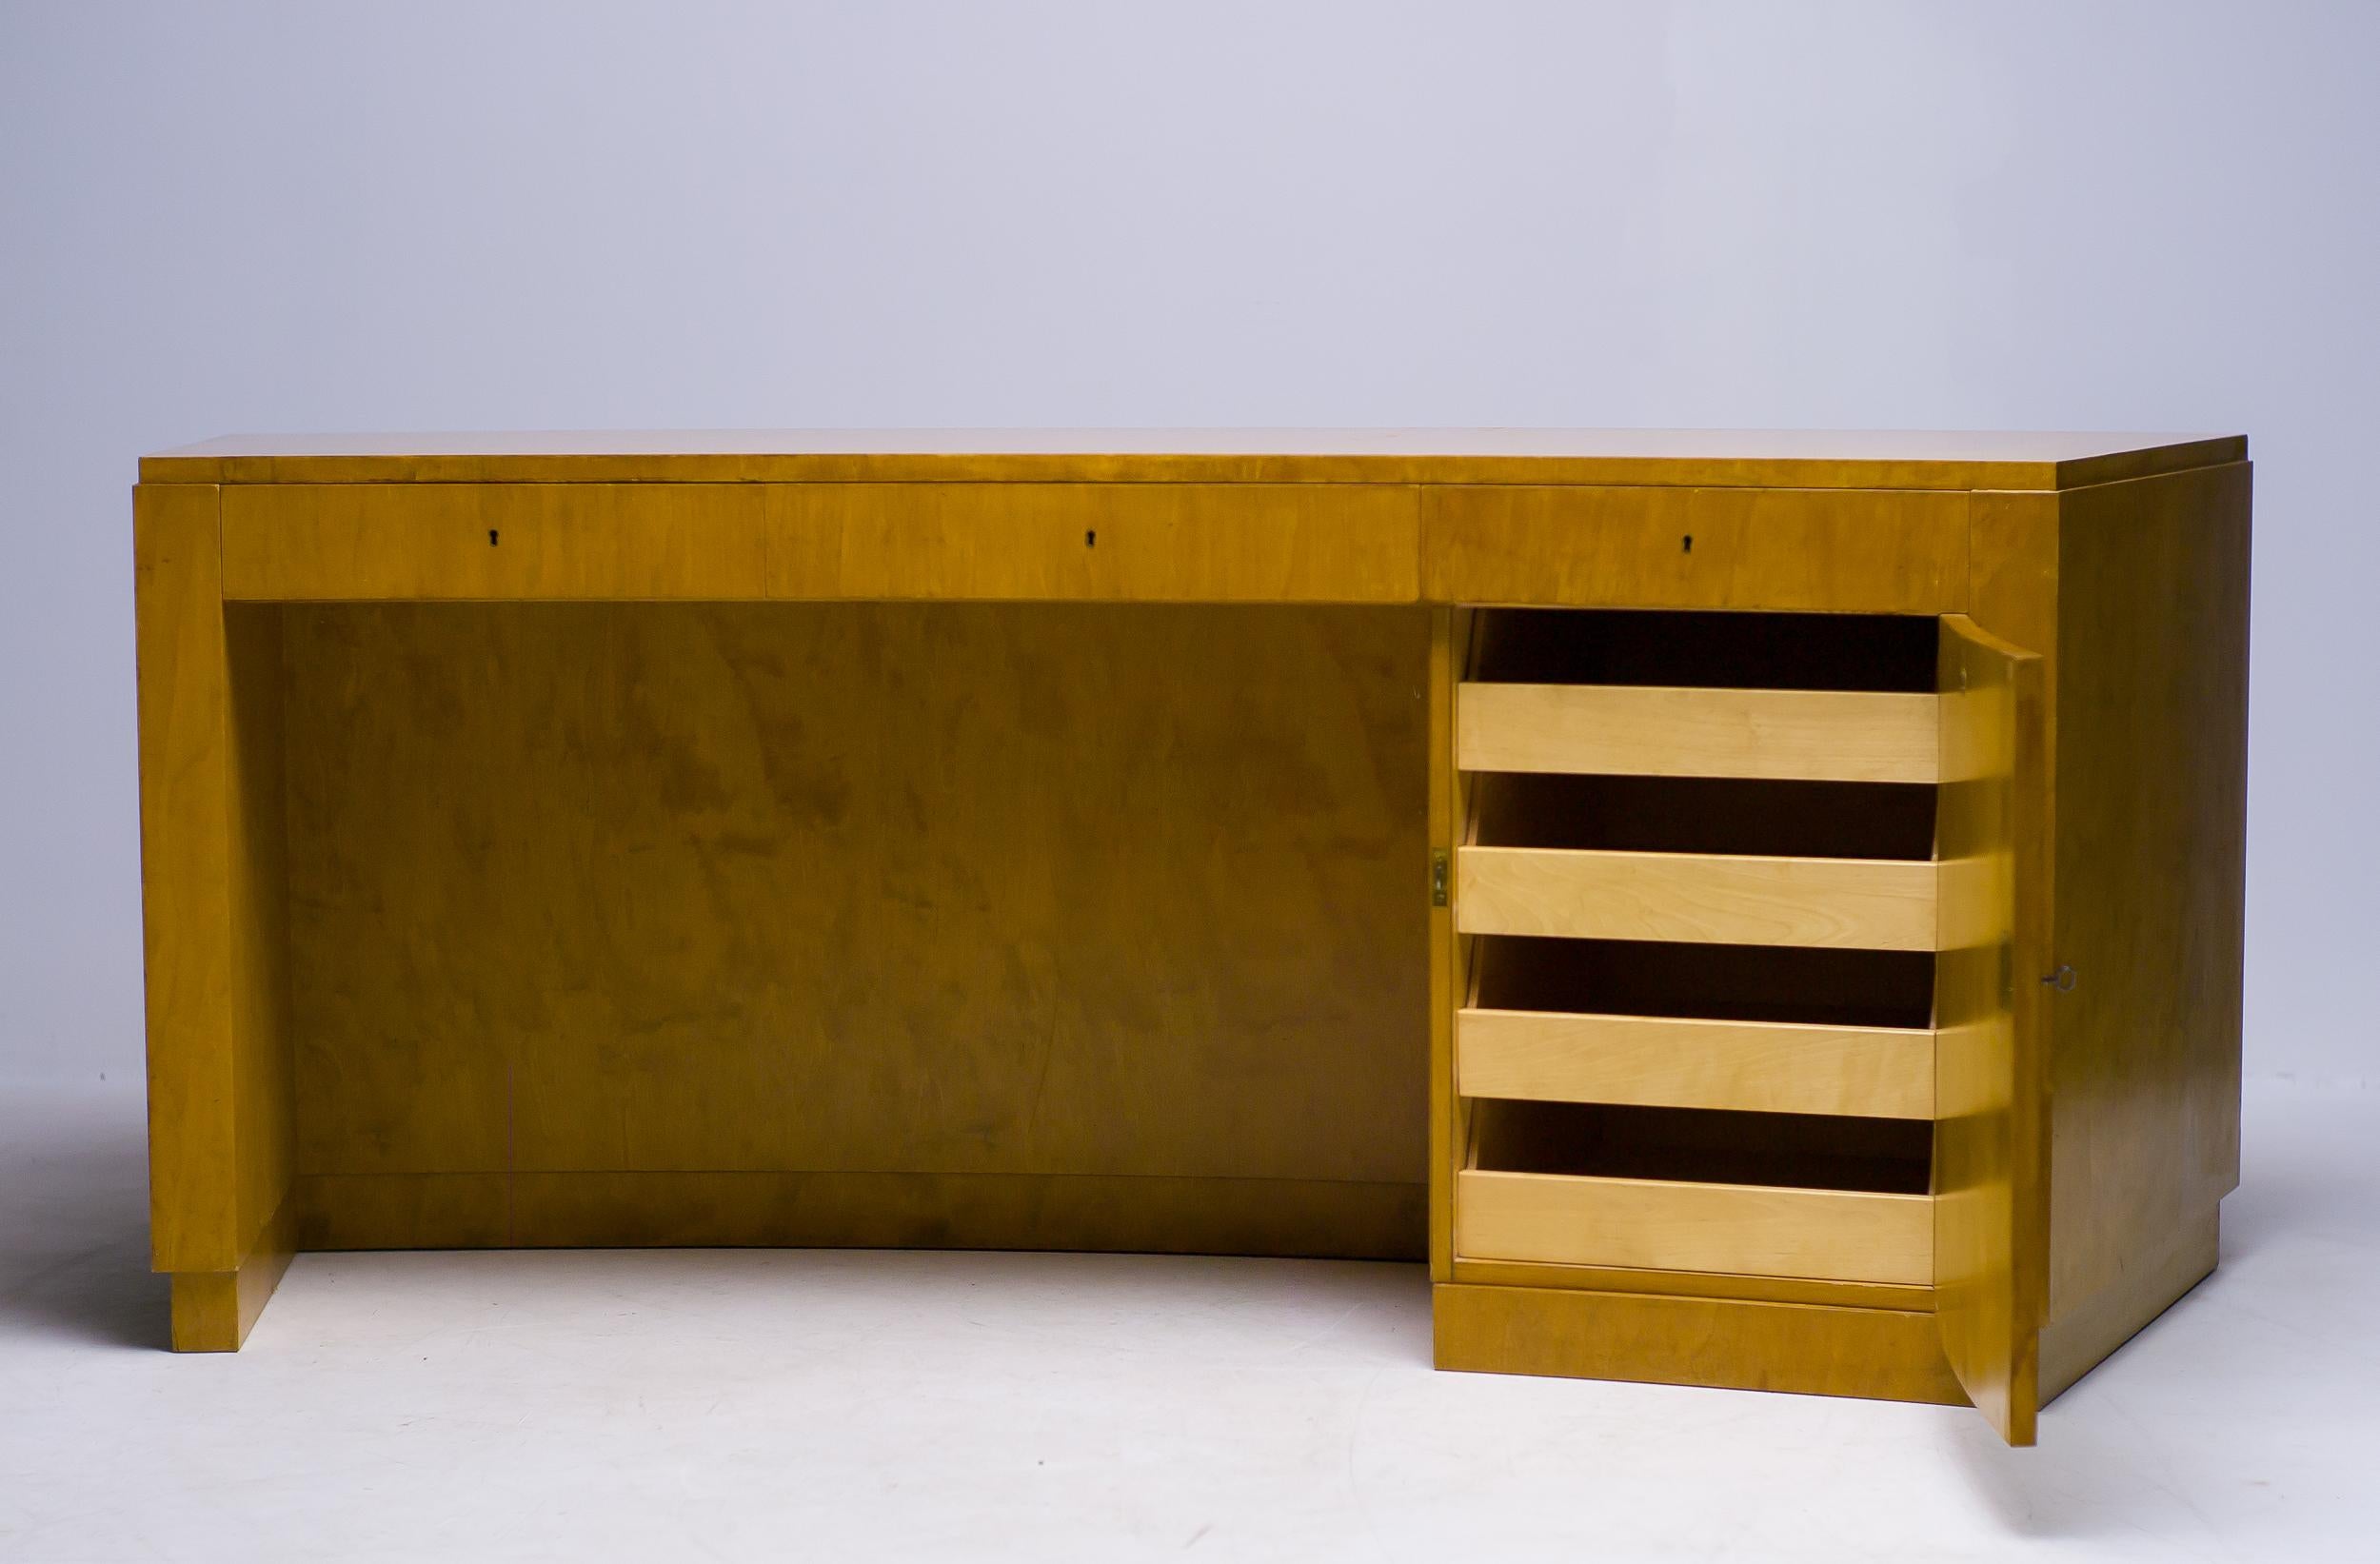 This beautifully streamlined desk is designed by Axel Einar Hjorth for NK in the 1930s. Clad in a pale gold birch veneer (Birka is Swedish for birch) with three locking drawers and a locking door with four concealed drawers. Two shelves are built